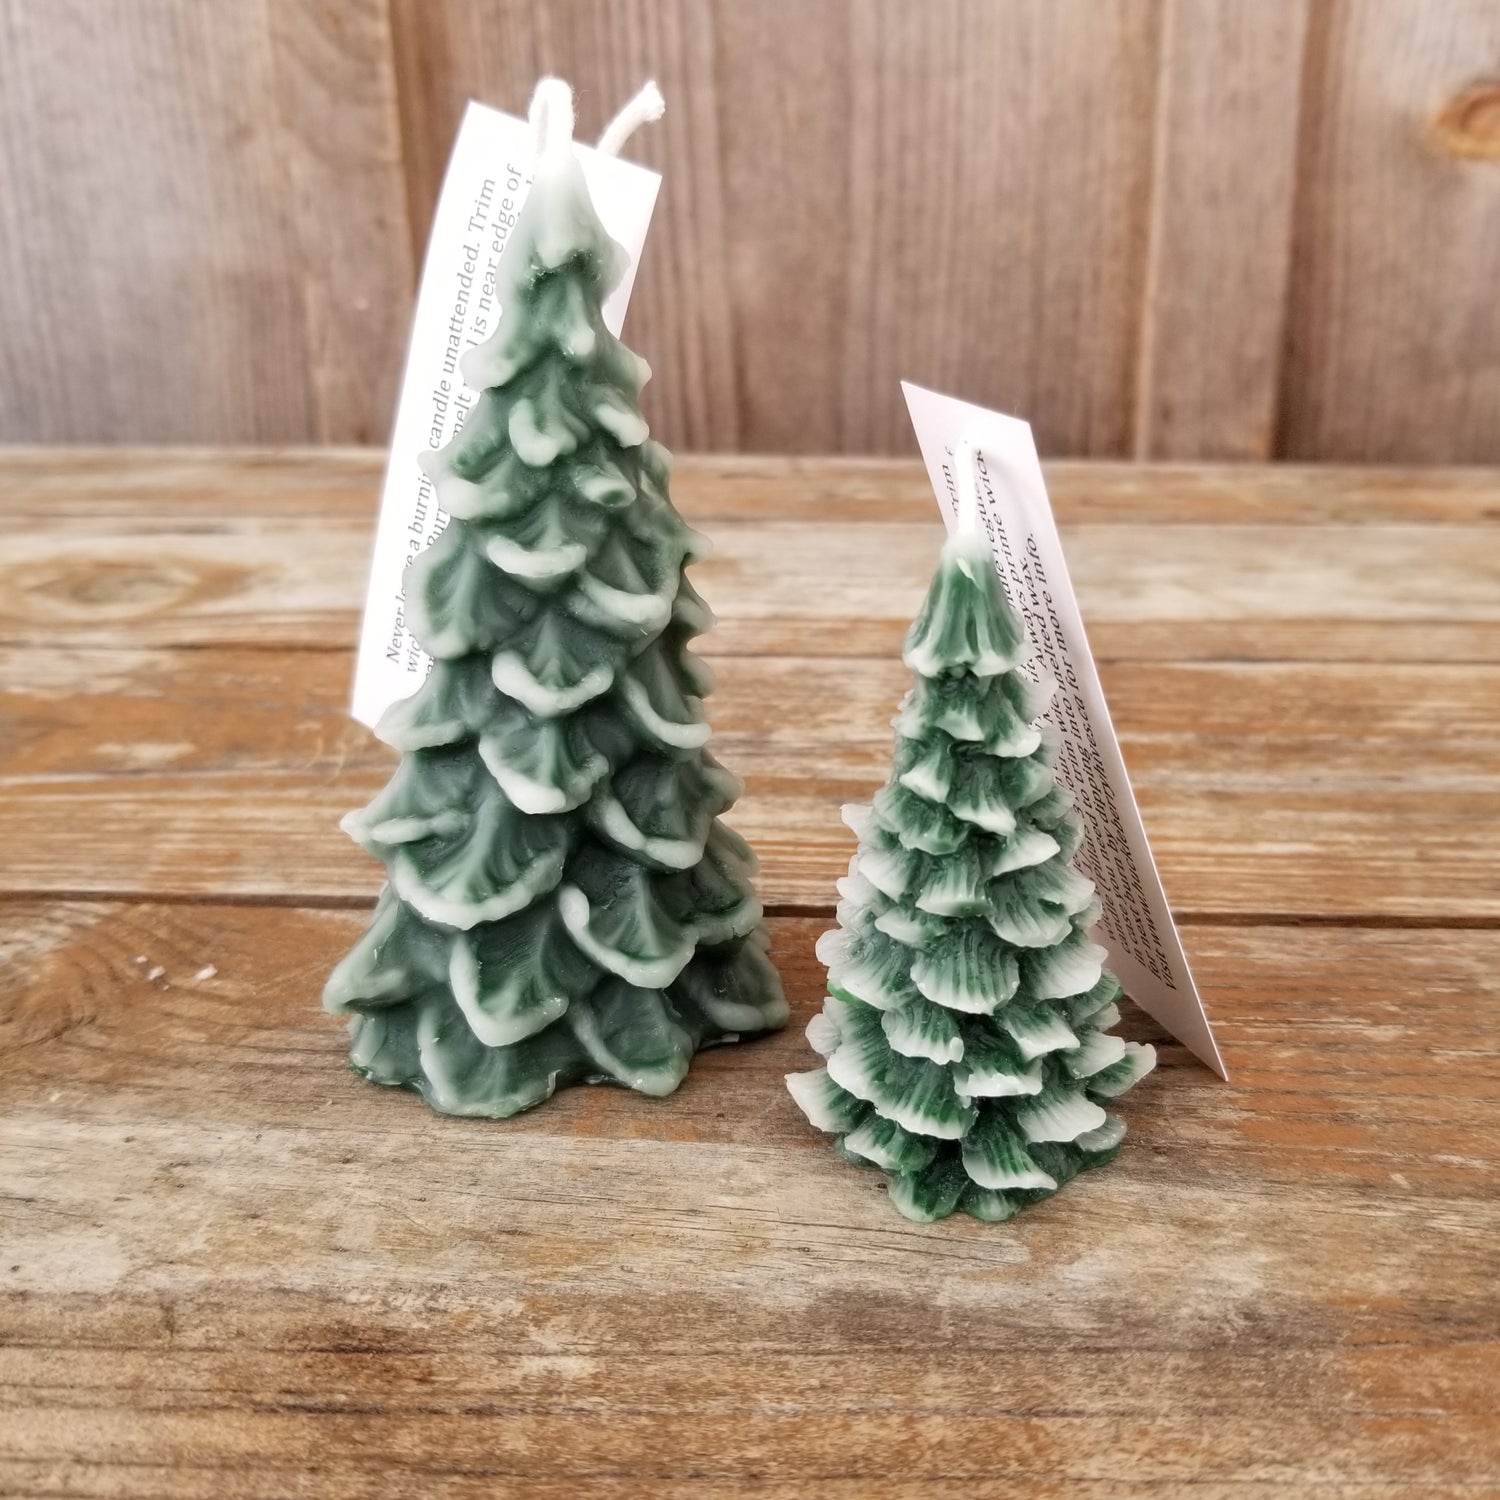 Beeswax fir tree candles; one large, one small, green and white, holiday decor 